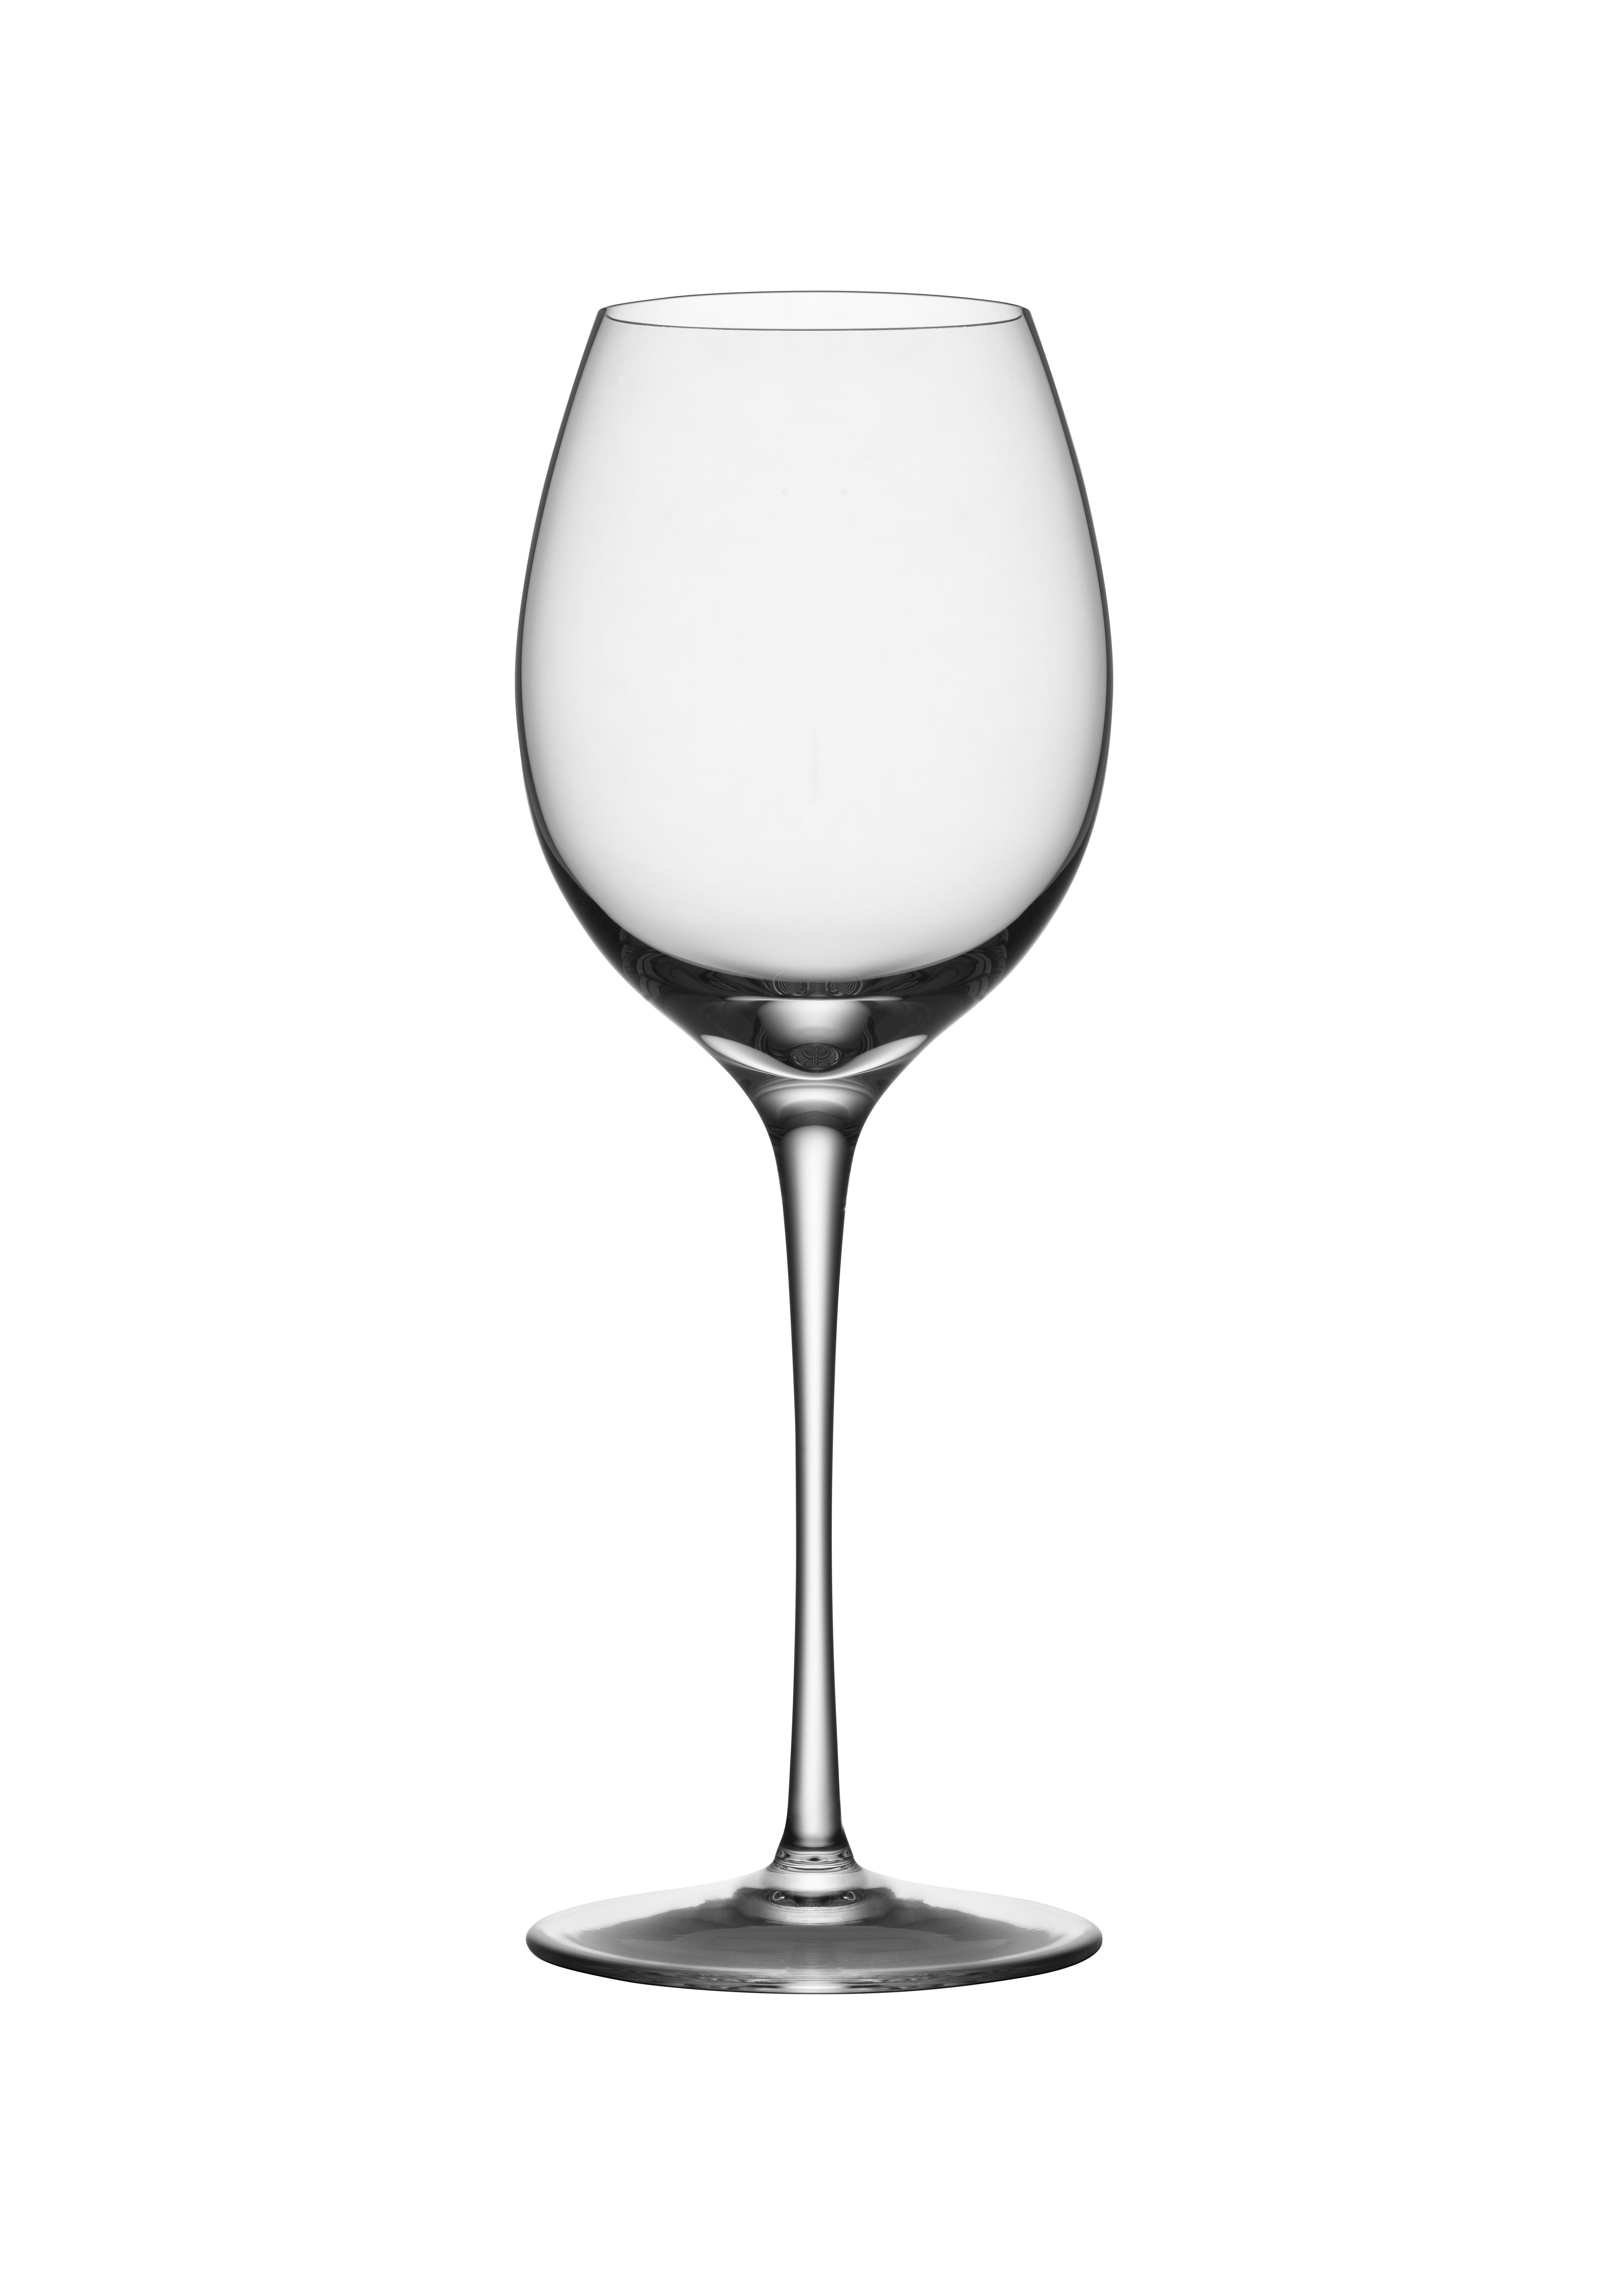 Premier Riesling from Orrefors, which holds 14 oz, is designed to emphasize the flavors and aromas of varietal wines, specifically Riesling or Zinfandel. The wine glass is mouth-blown with a handmade stem and is an elegant complement to any table